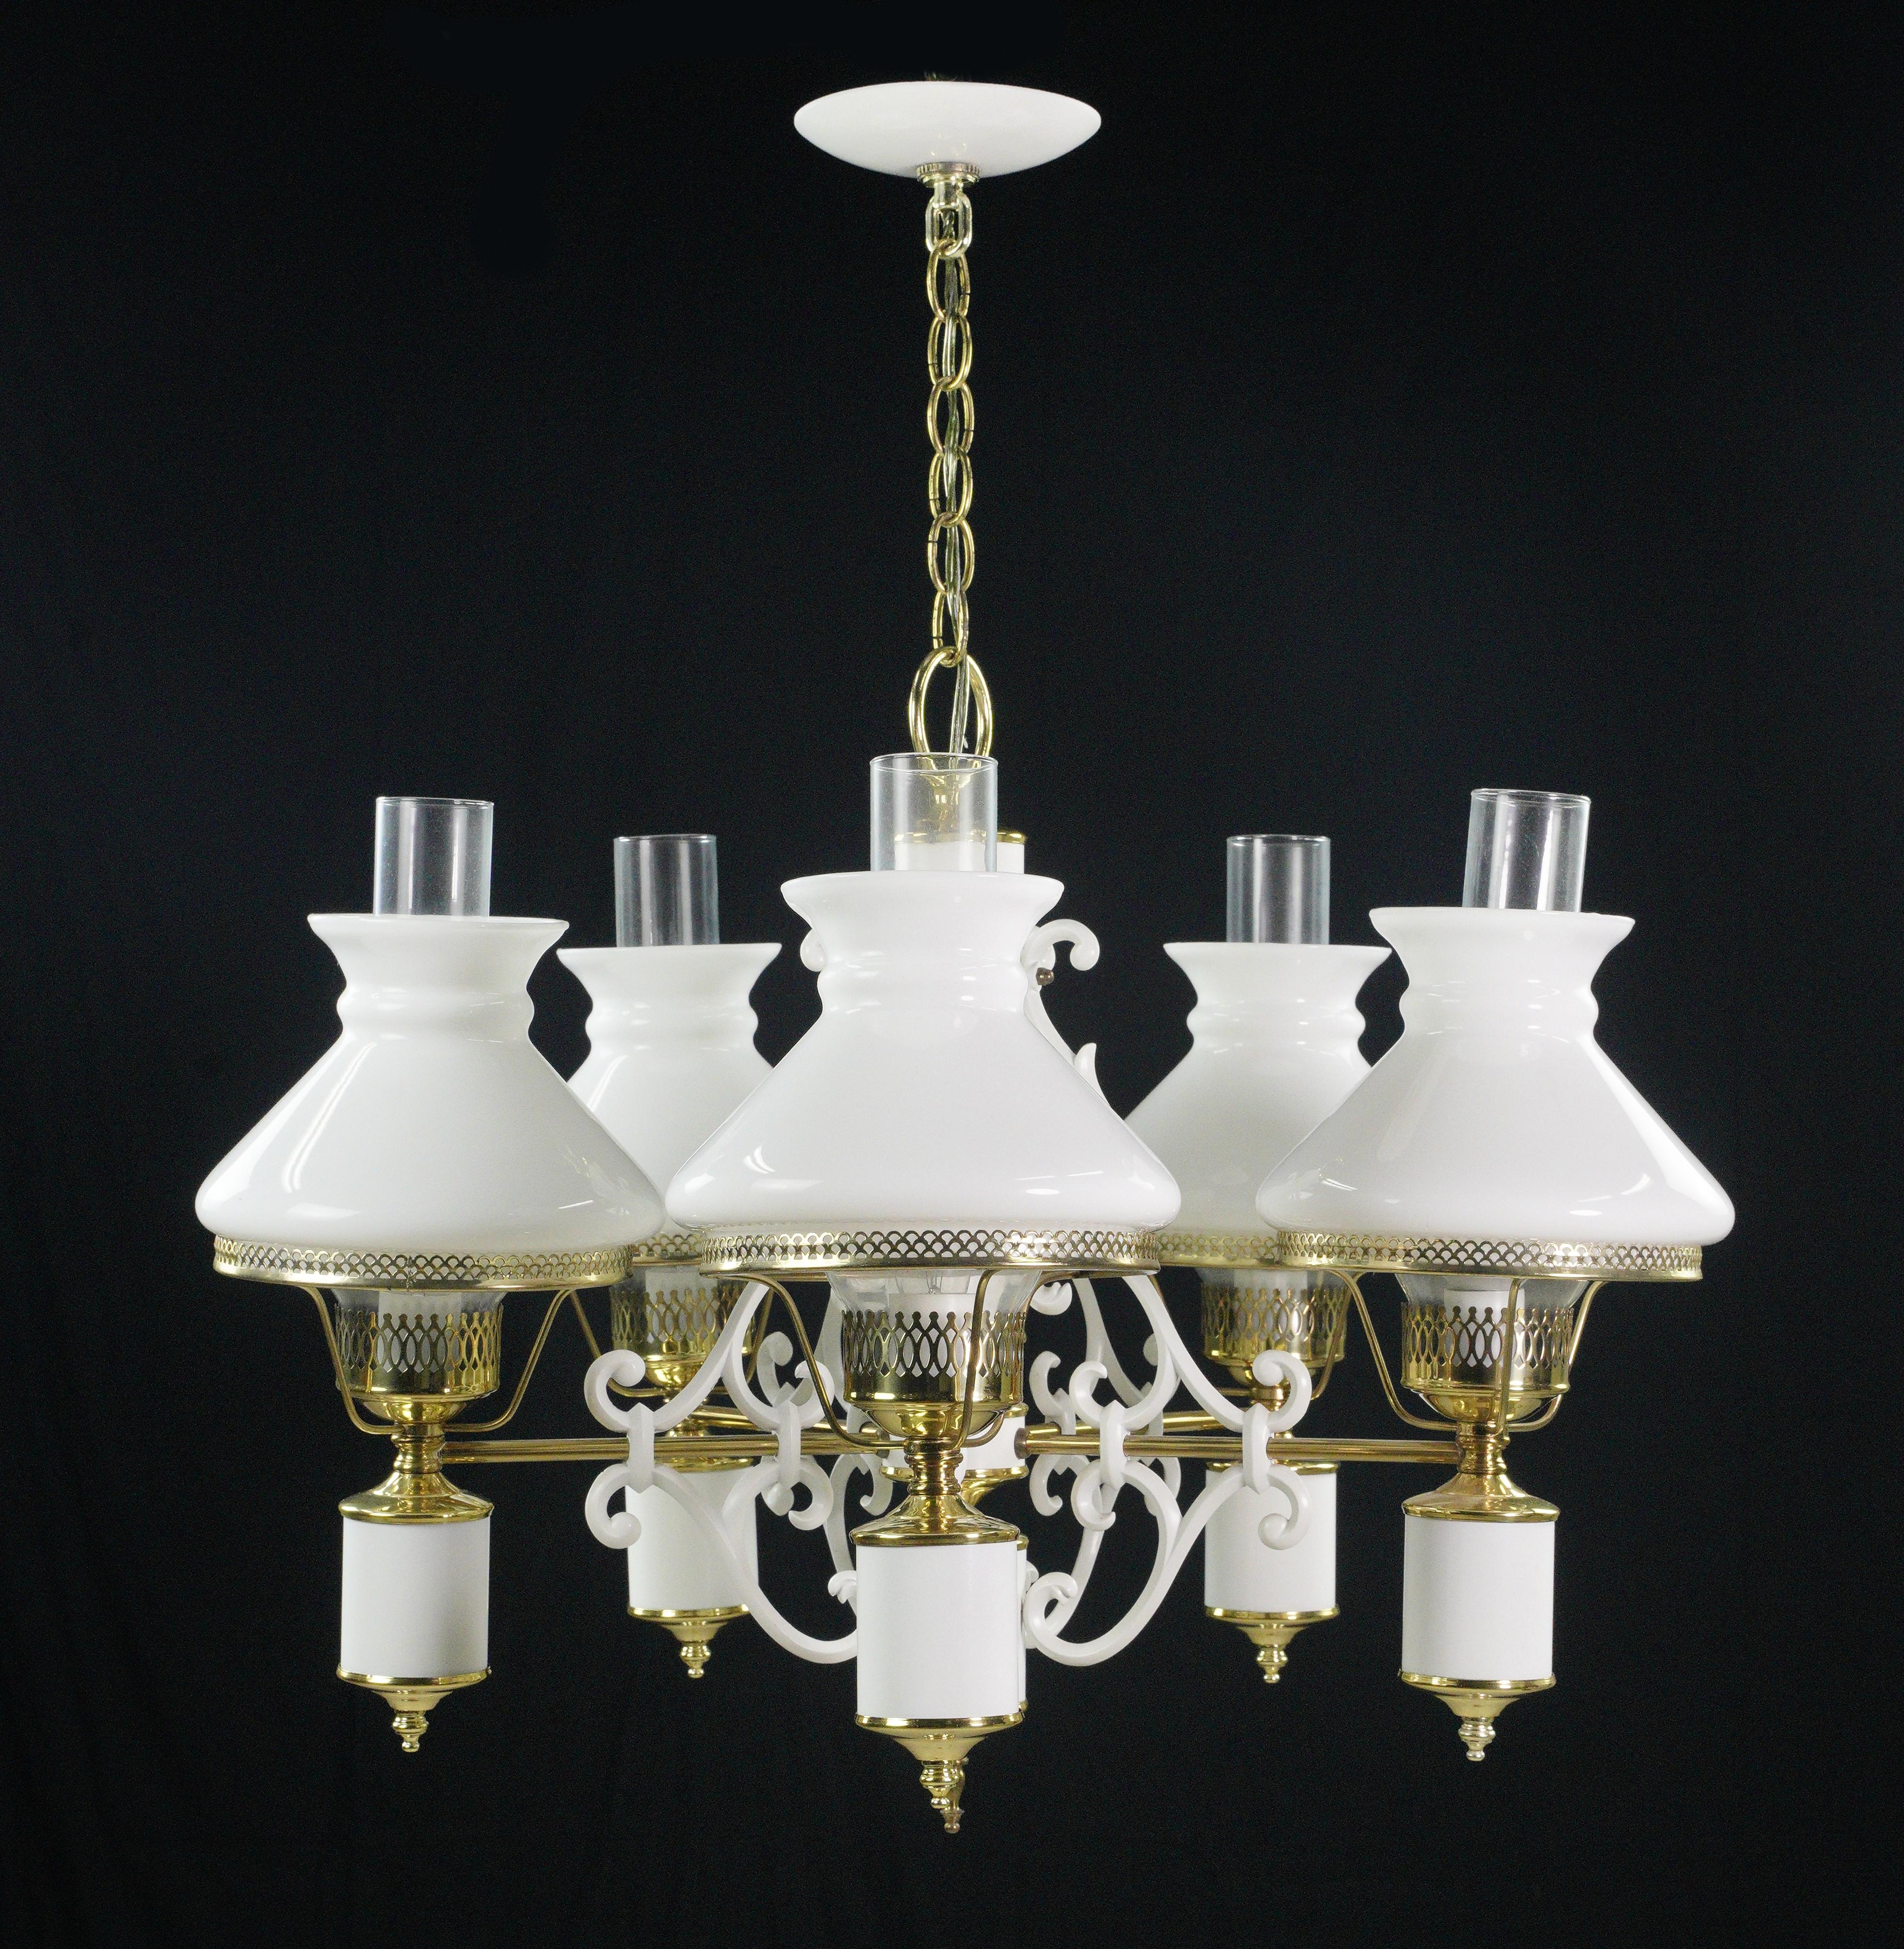 This Victorian style five arm chandelier is a masterpiece of vintage design. Its graceful arms adorned with white glass shades exude elegance, while the brass finish steel and white aluminum elements add a touch of sophistication, creating a